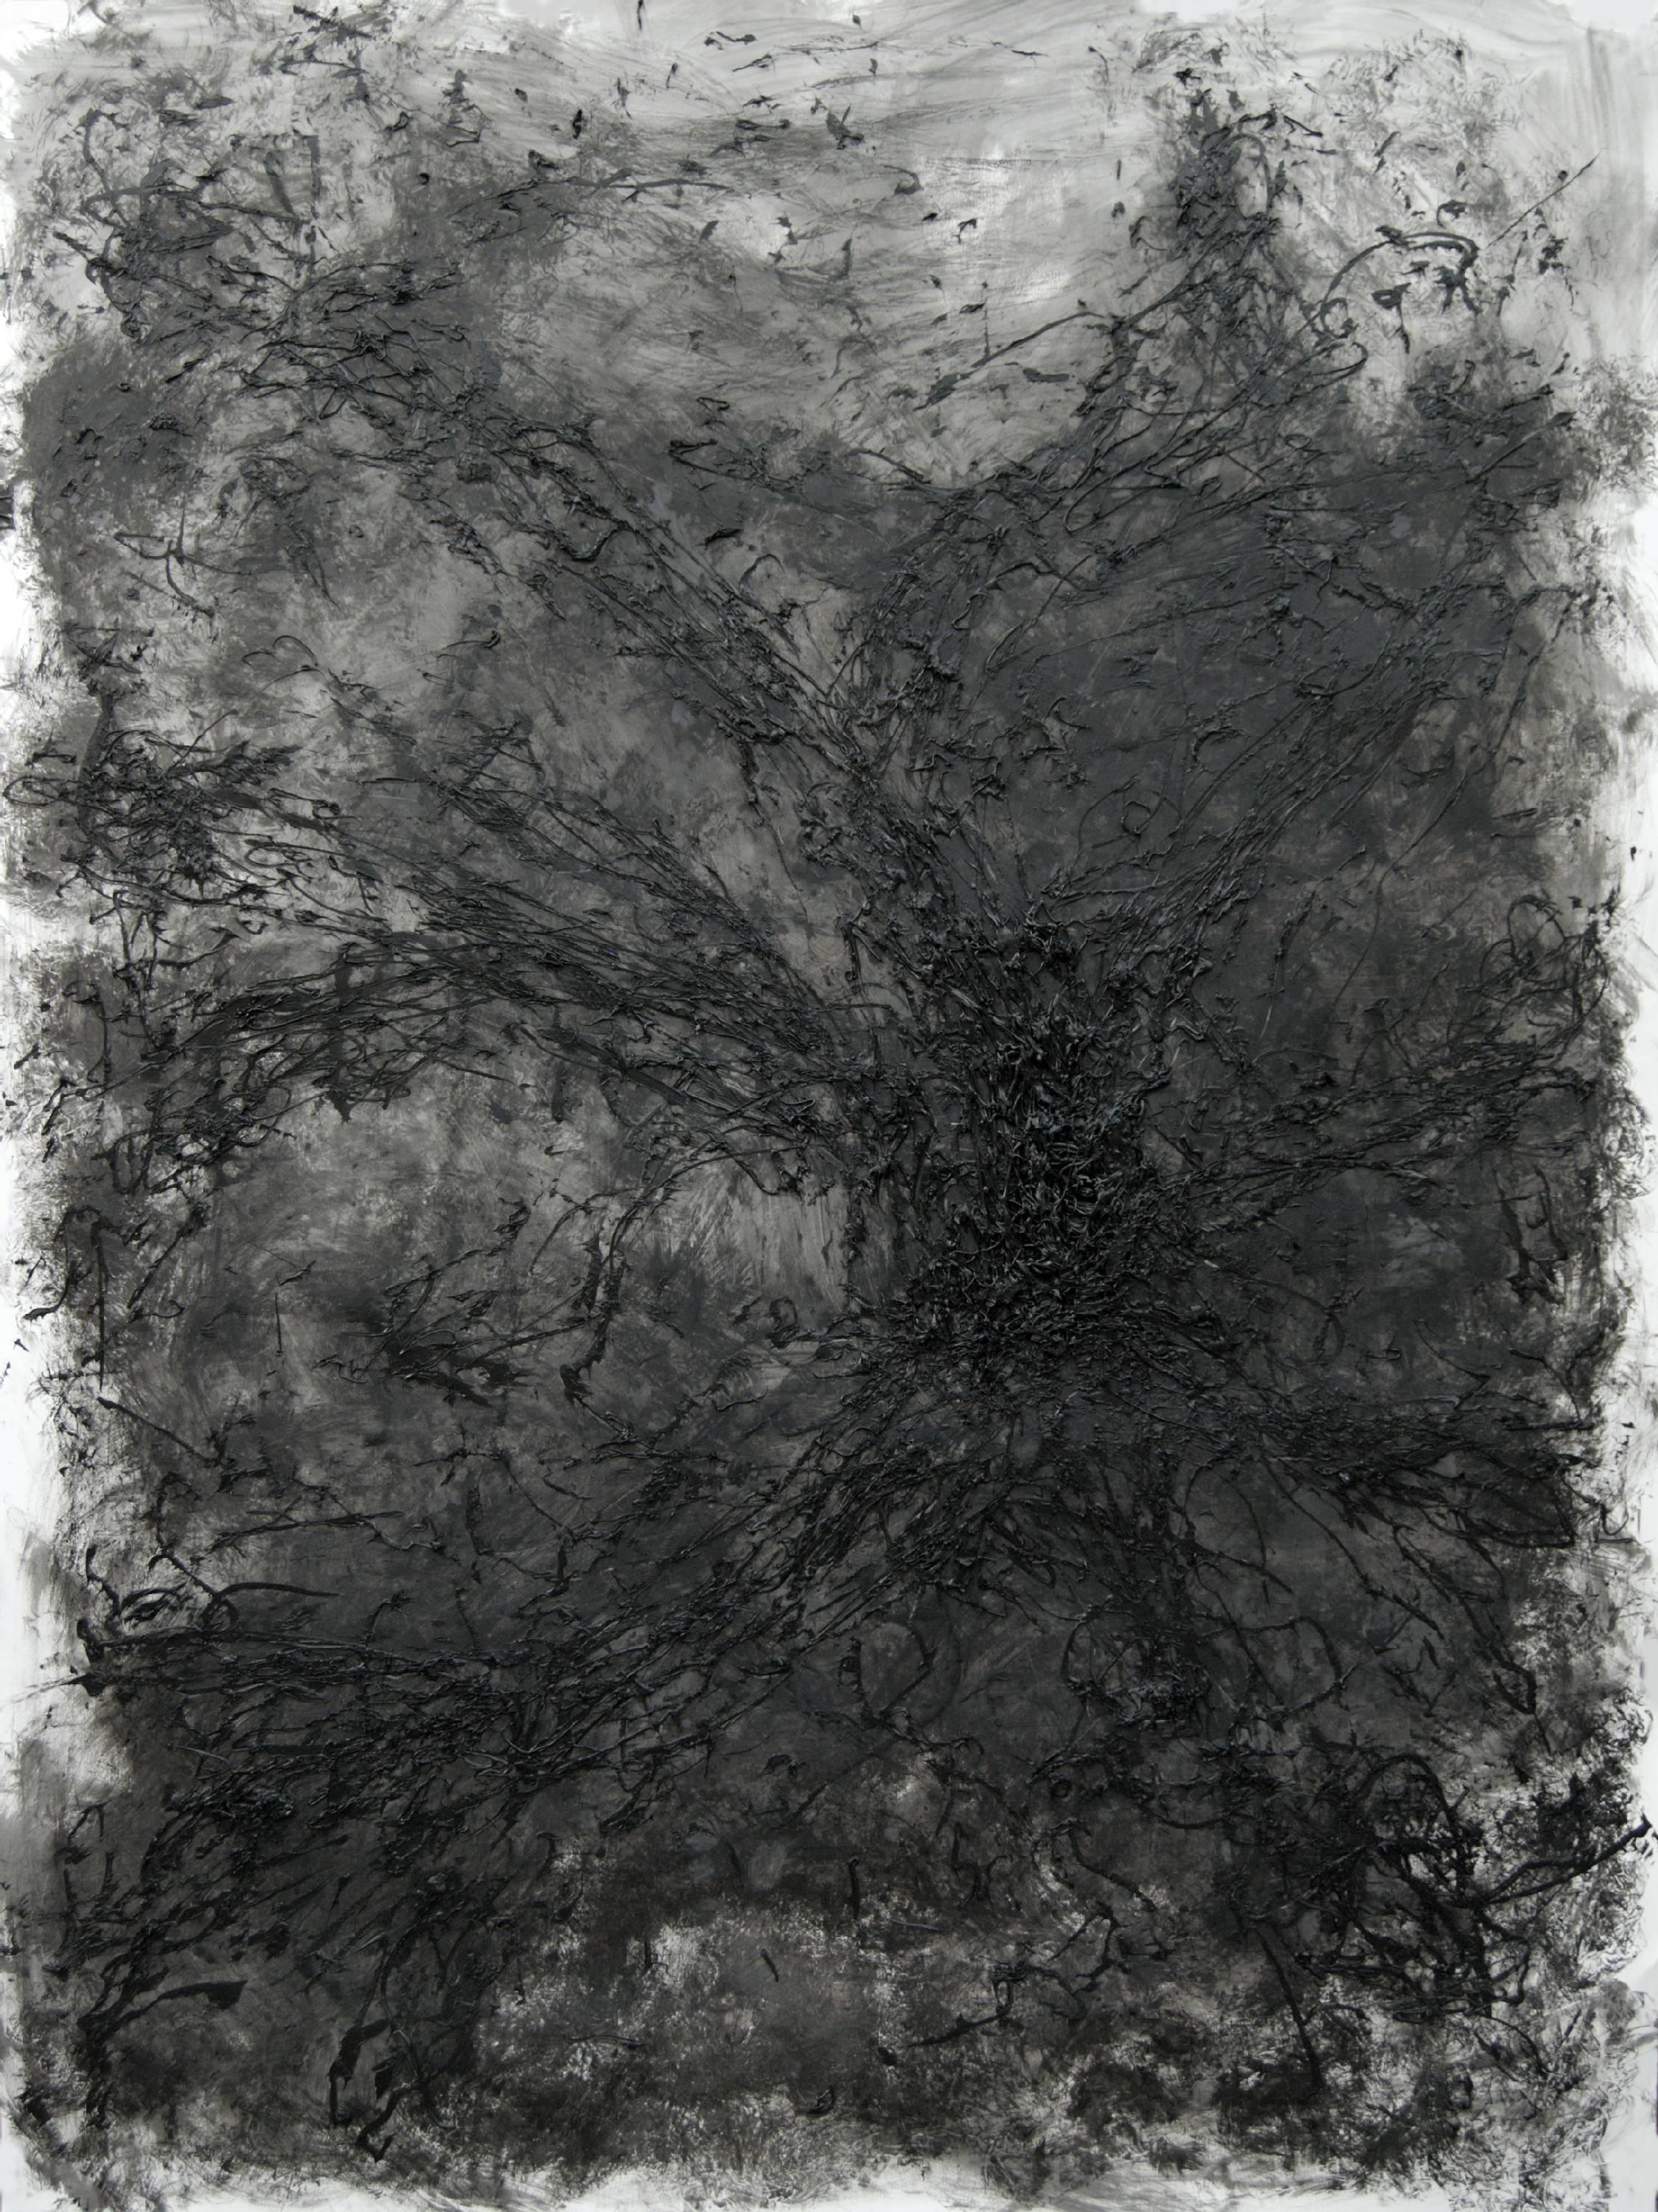 Untitled - 21st Century, Black, Monochrome, Abstract Drawing, Organic, Tactile - Mixed Media Art by Zsolt Berszán